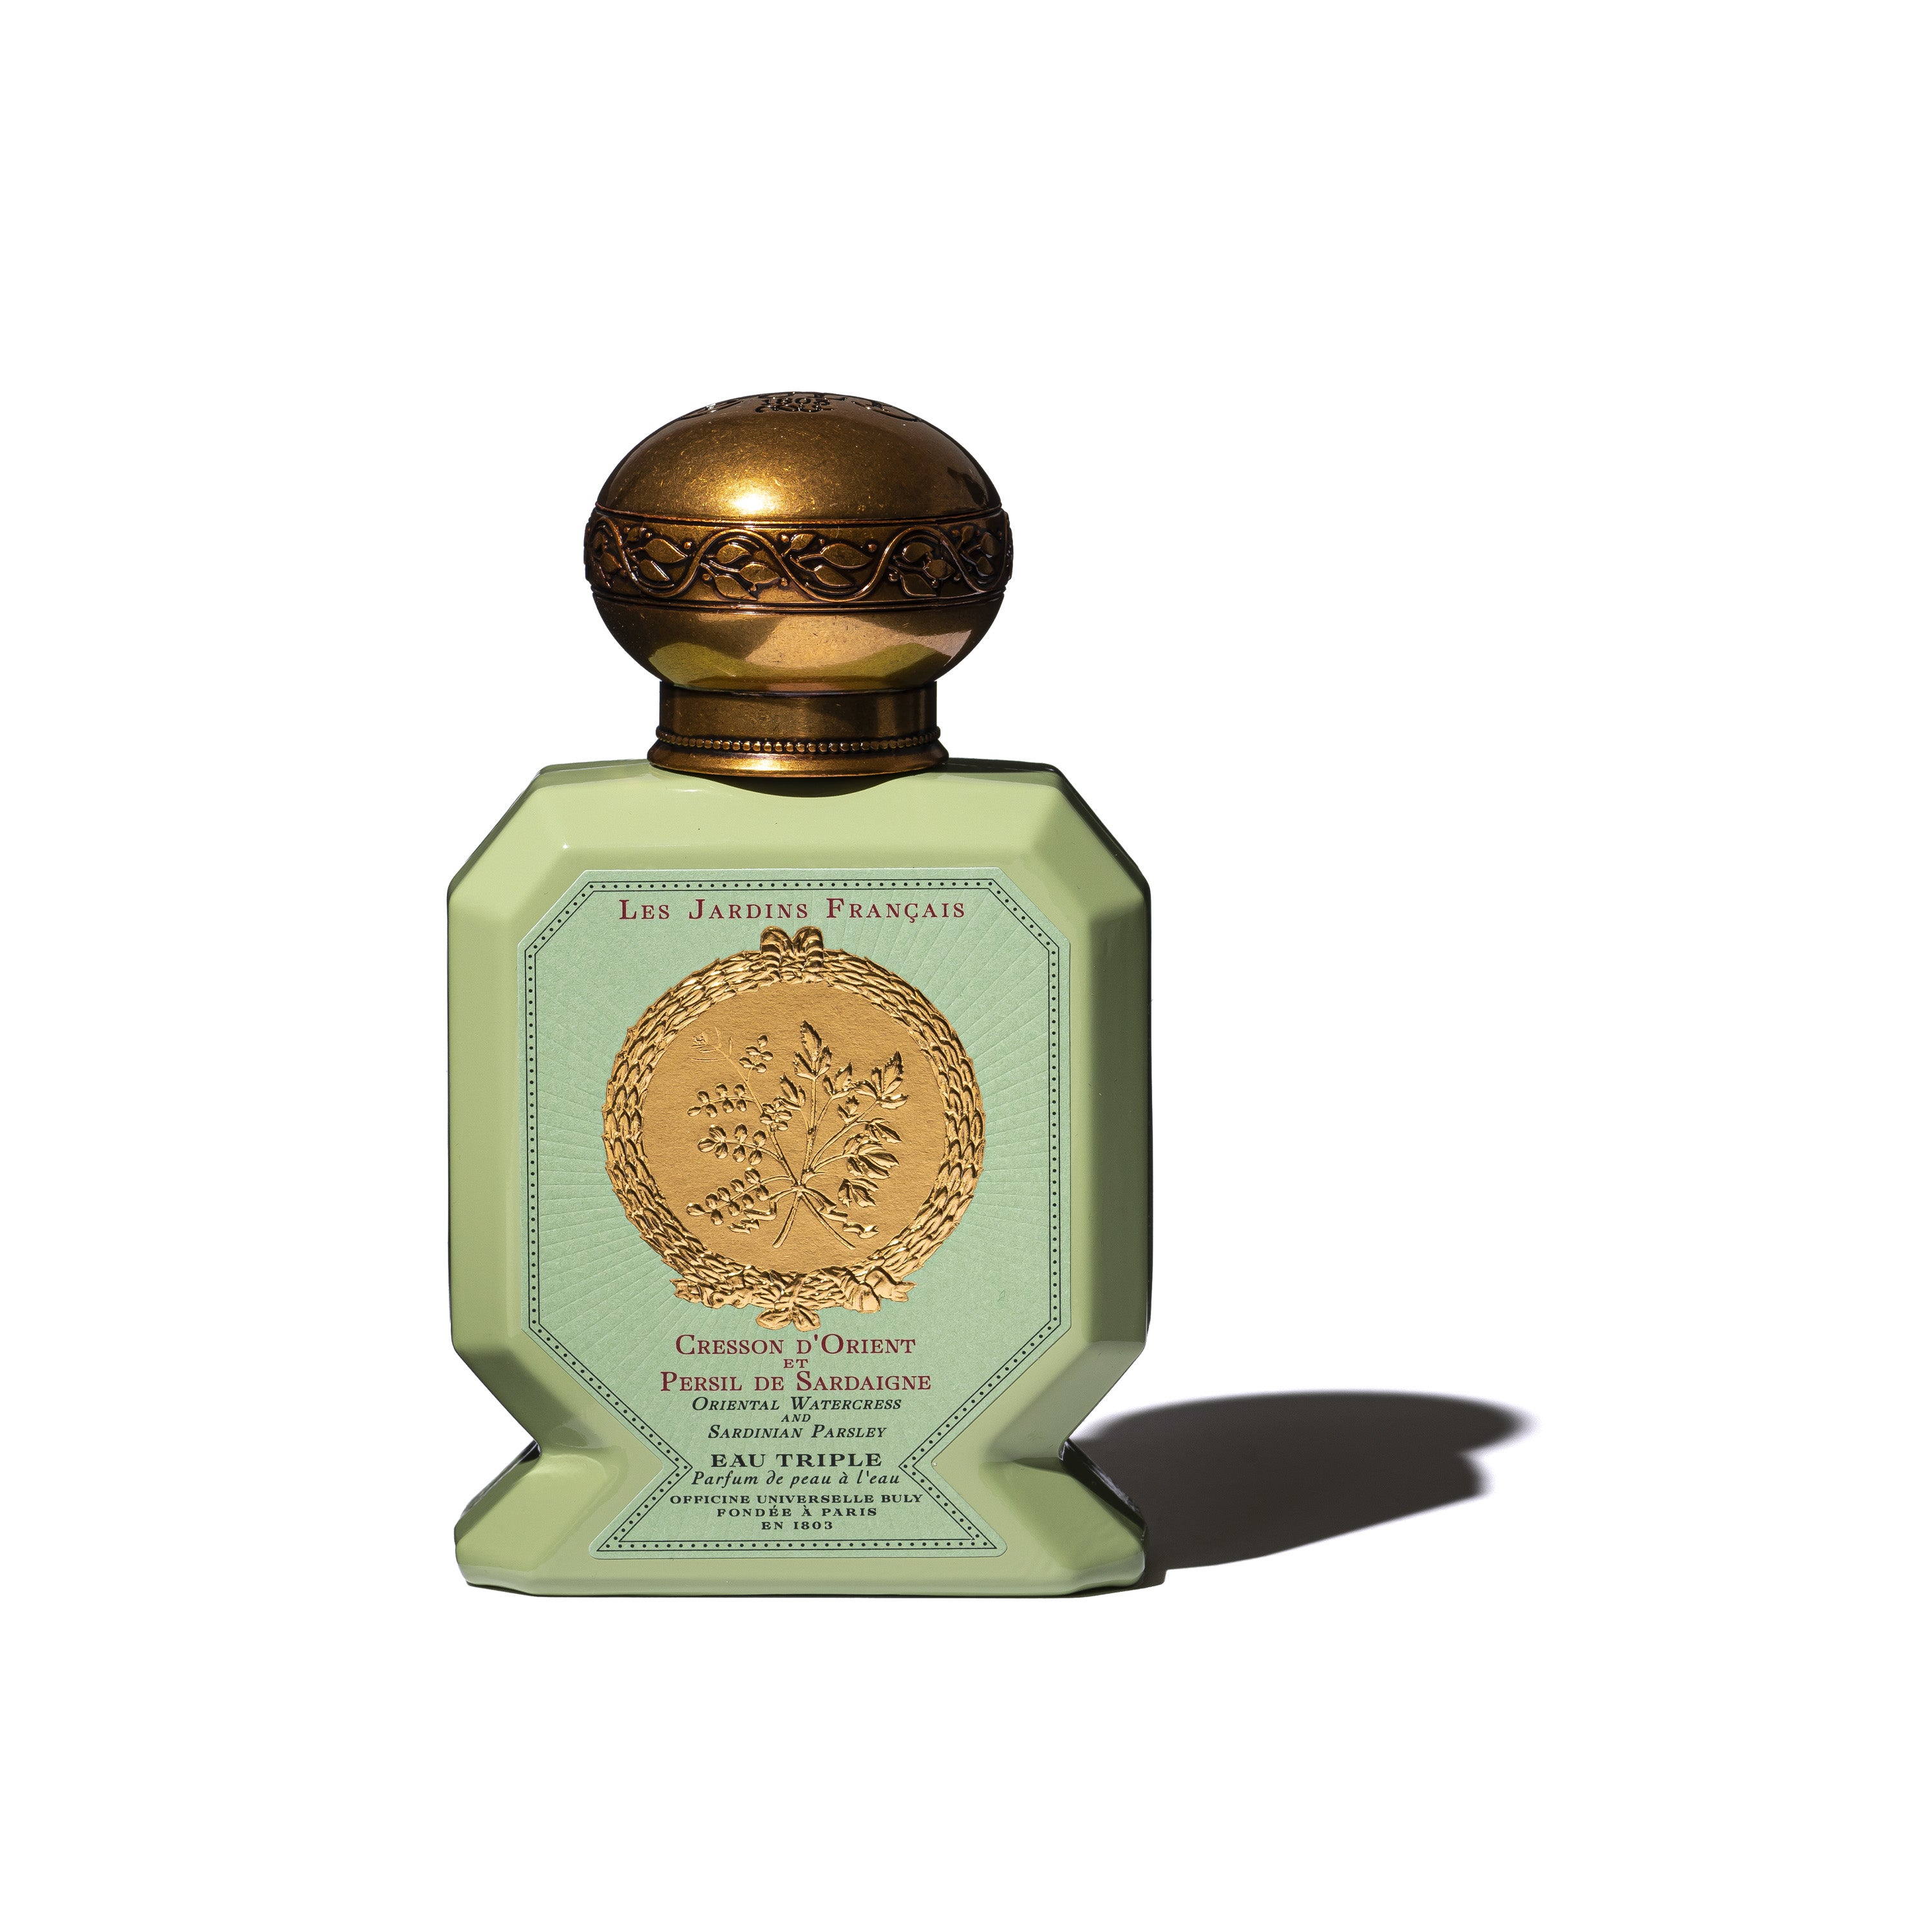 PERFUME THE ATMOSPHERE – Officine Universelle Buly